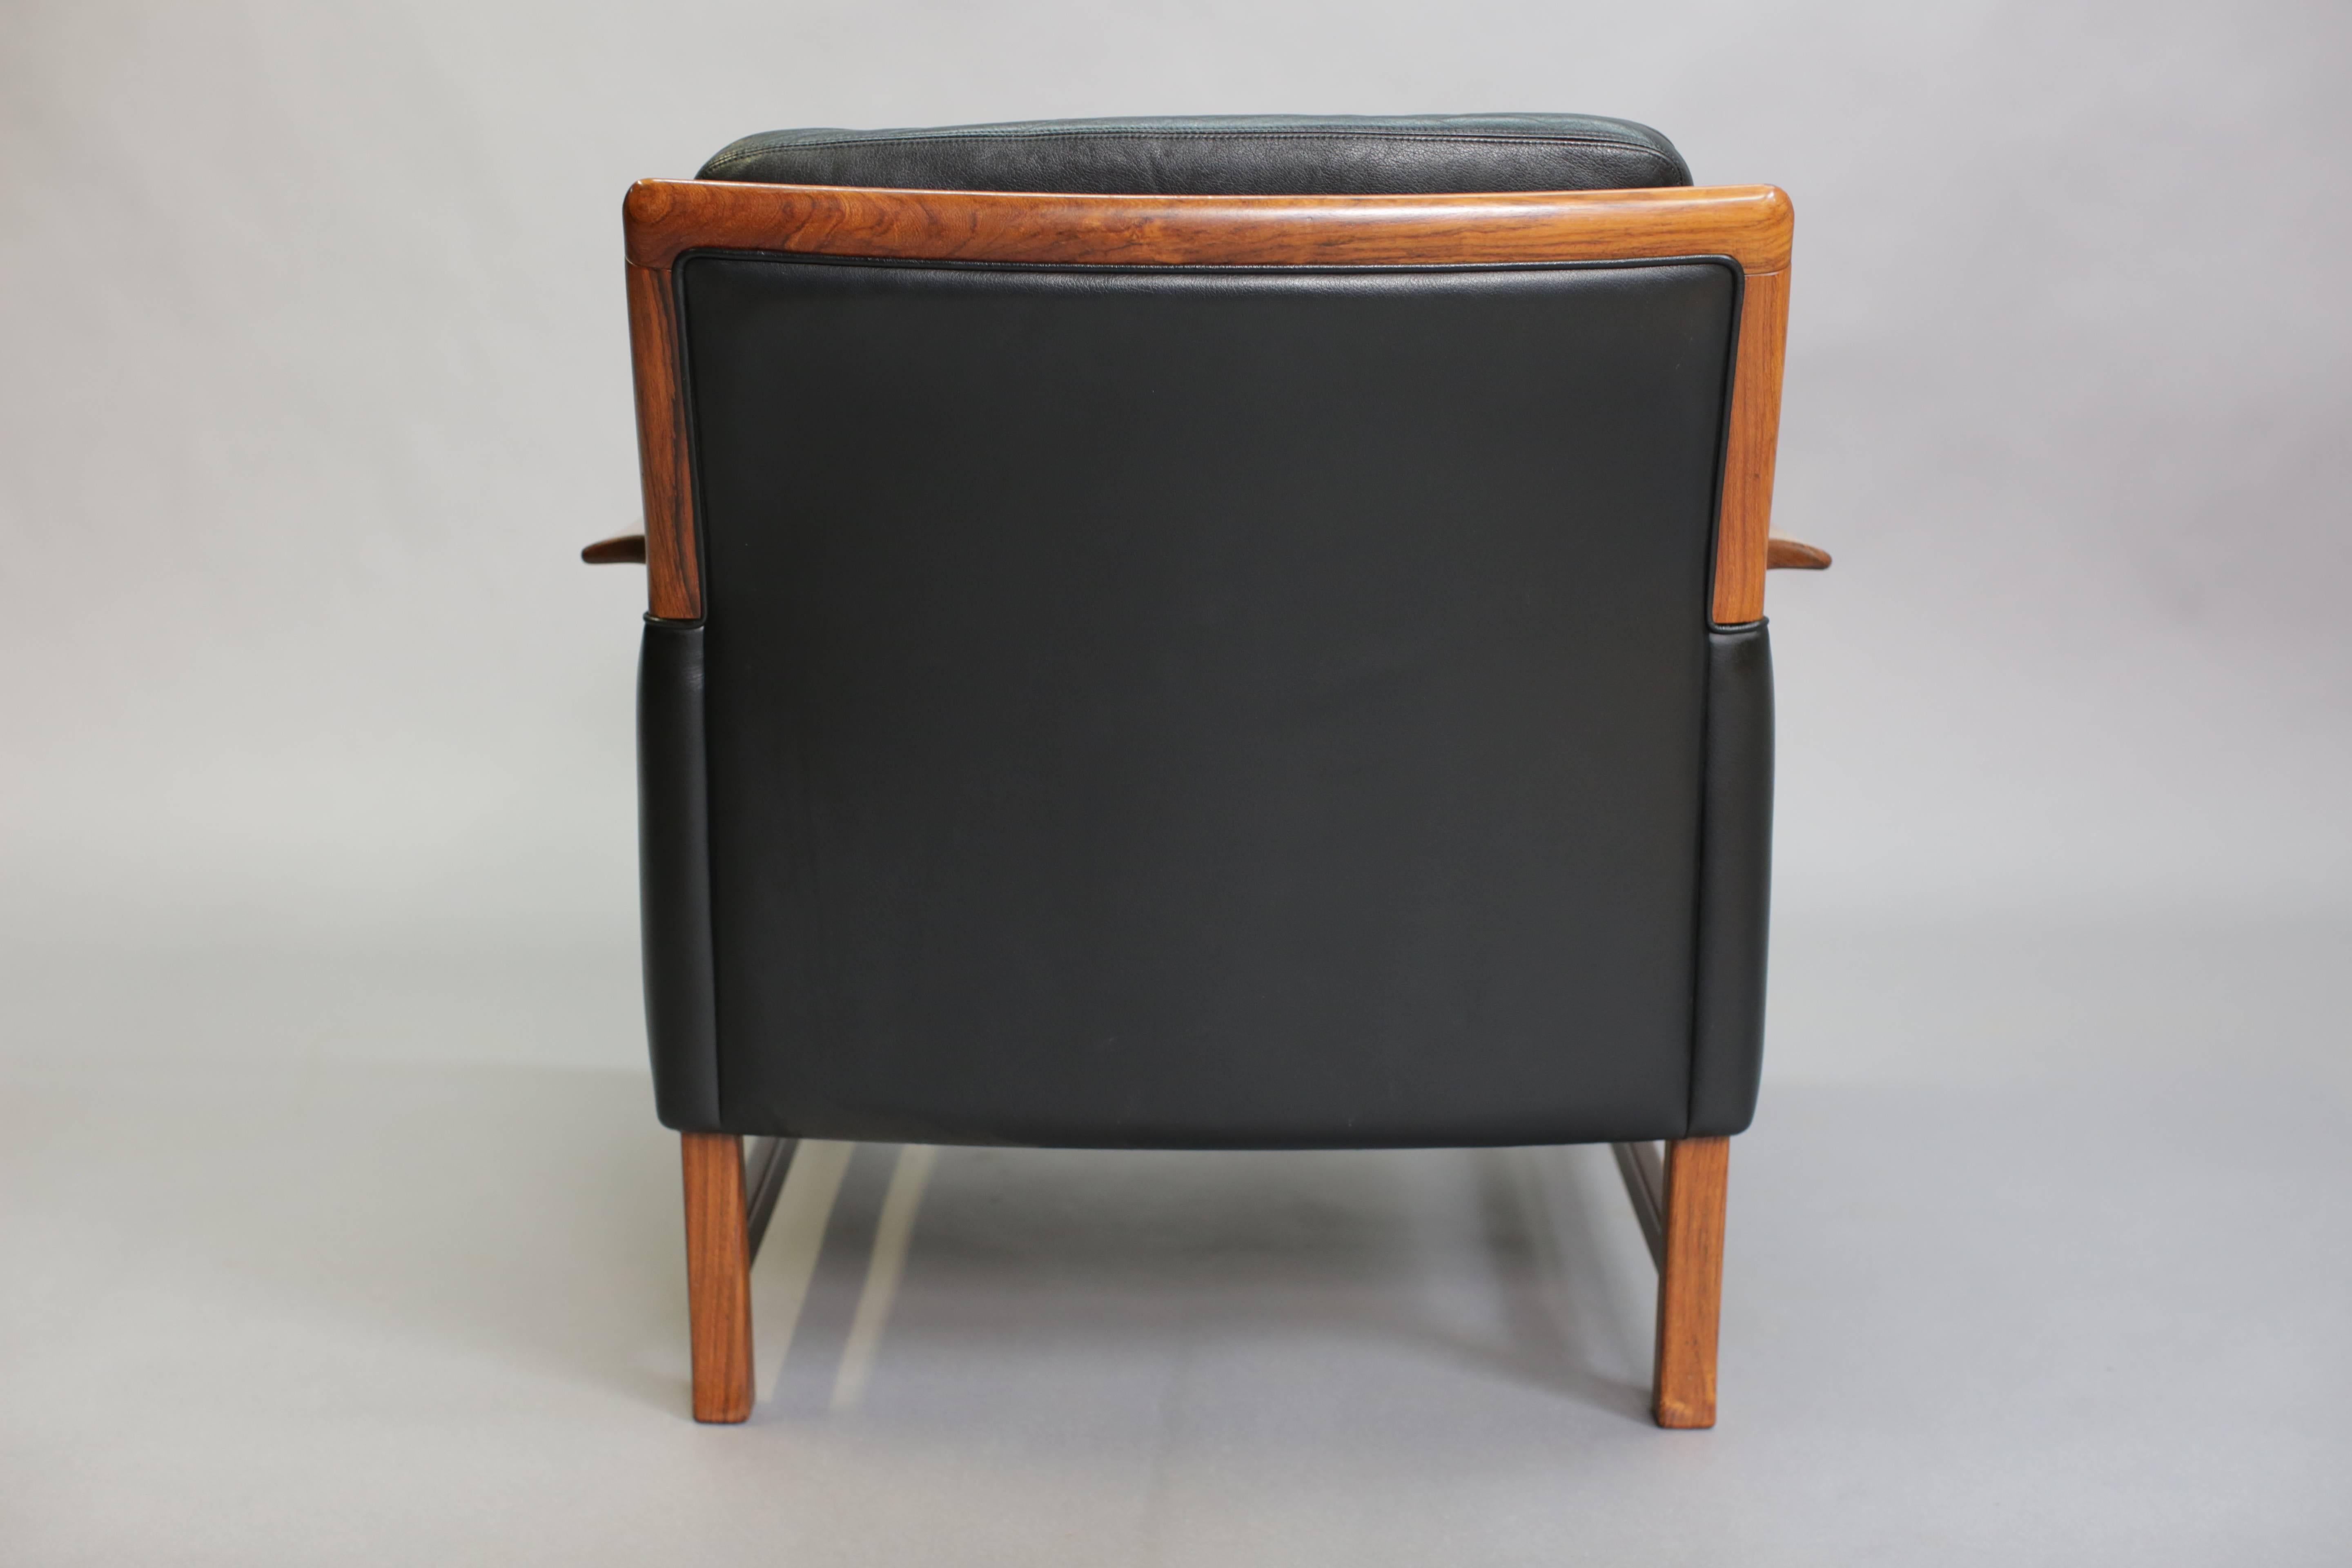 Torbjørn Afdal “Minerva” club chairs for Bruksbo.

This pair of Mid-Century club chairs by Norwegian designer, Torbjørn Afdal are in excellent condition. Leather is perfectly worn. Ready for pick up, delivery or shipping anywhere in the world.